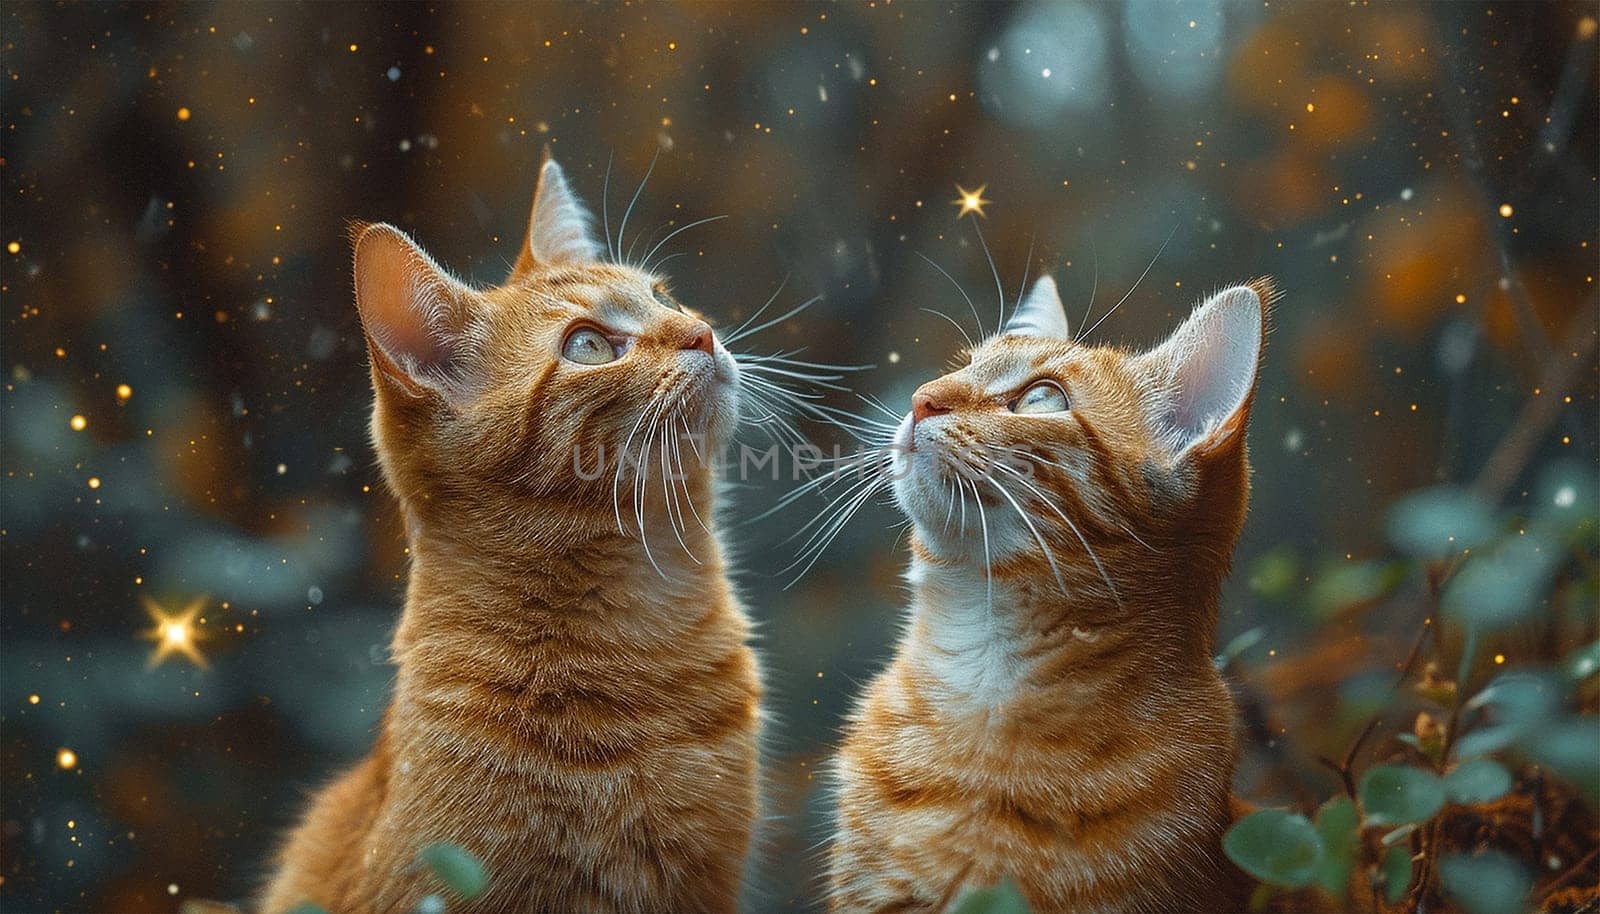 A cute cat looking outside at the starry colorful sky. Cute kitten magical sparkles. Starry glow lights in nature Magical landscape fairytale by Annebel146